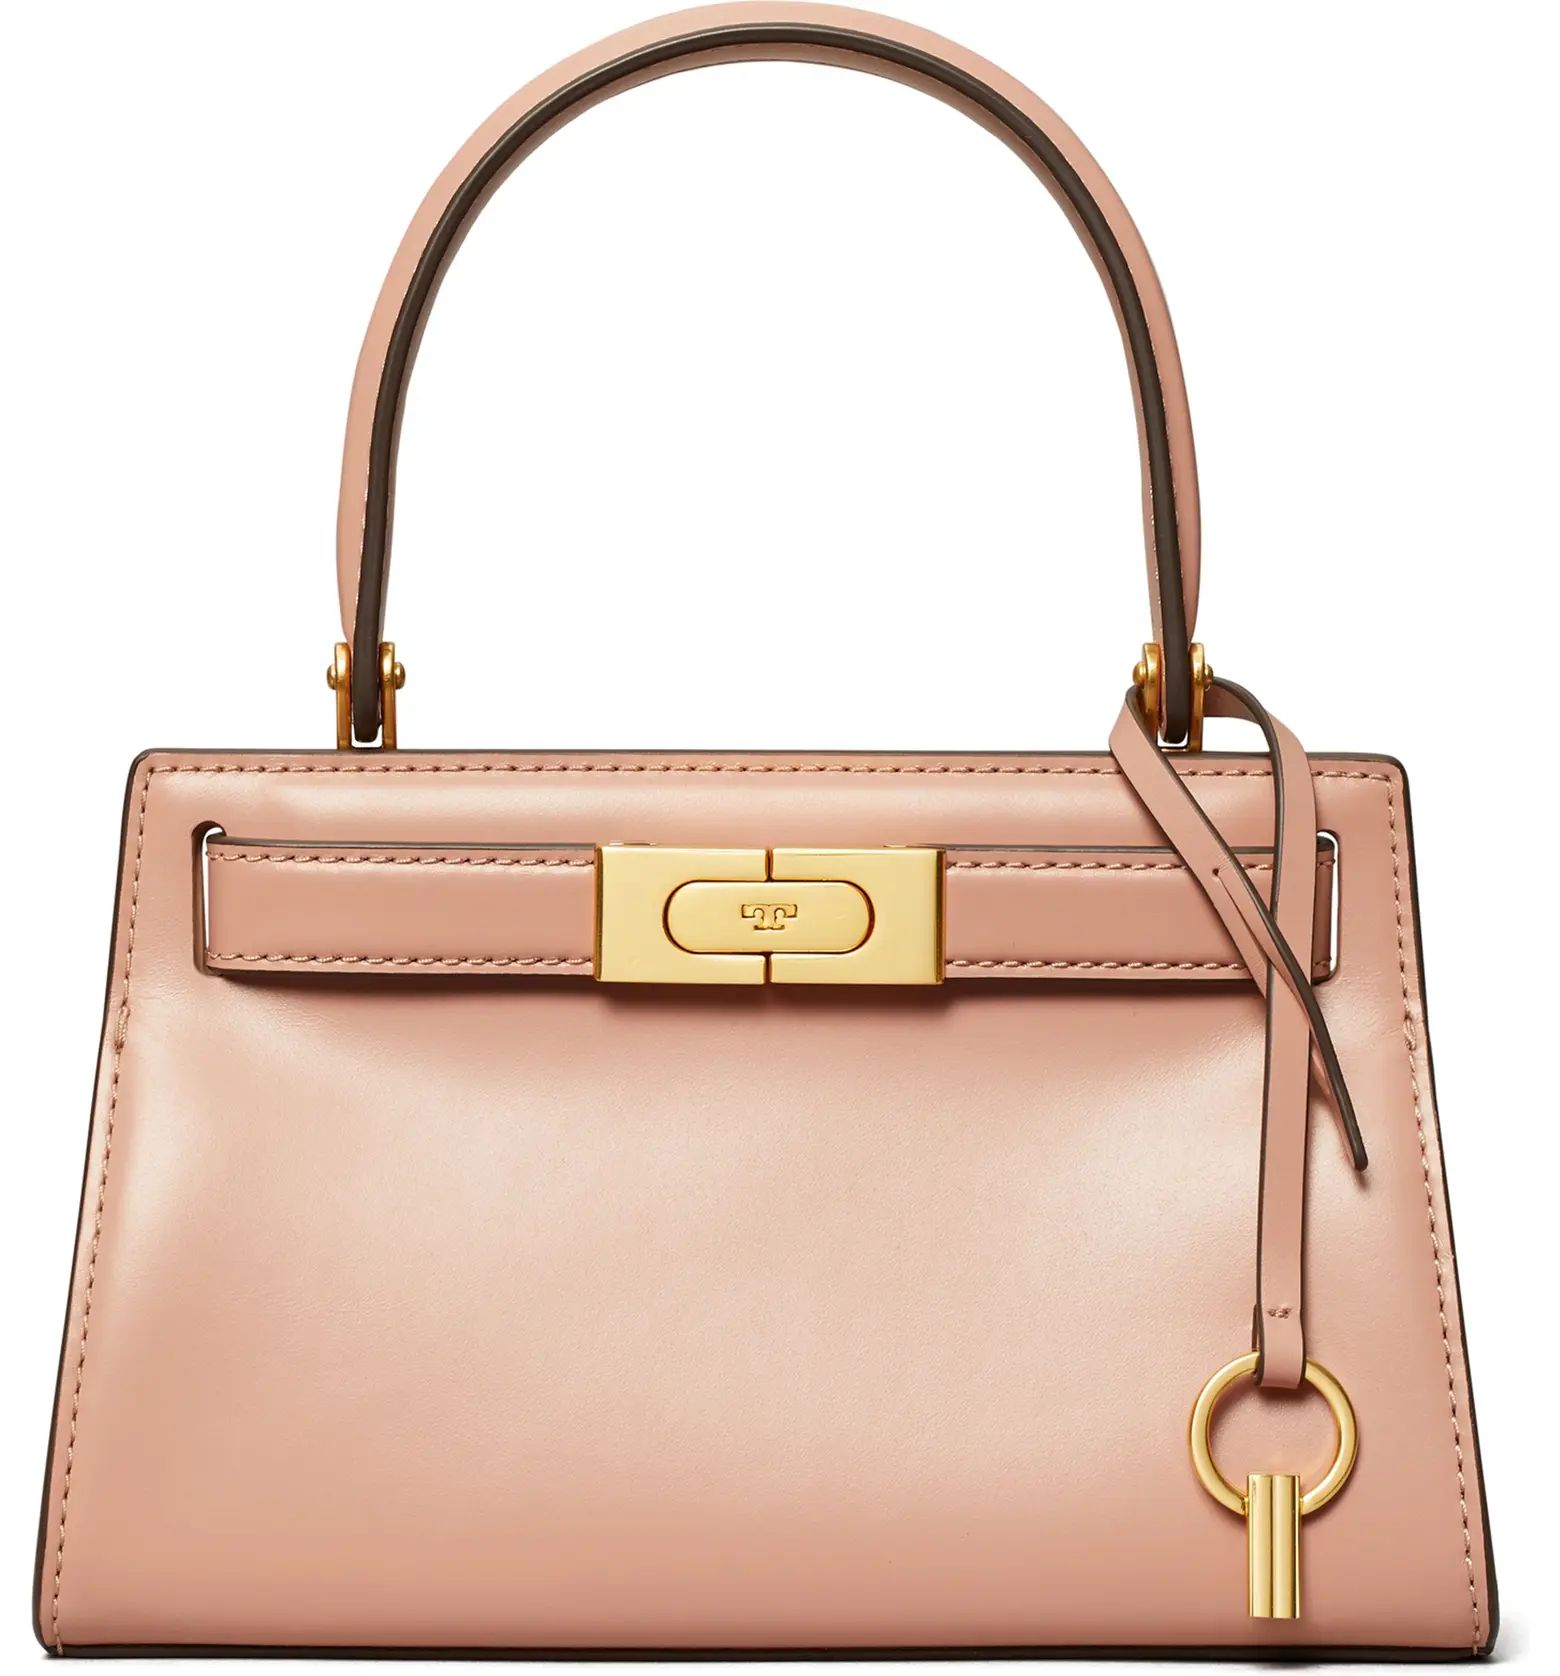 Tory Burch Mini Lee Radziwill Leather Bag | Nordstrom | Nordstrom